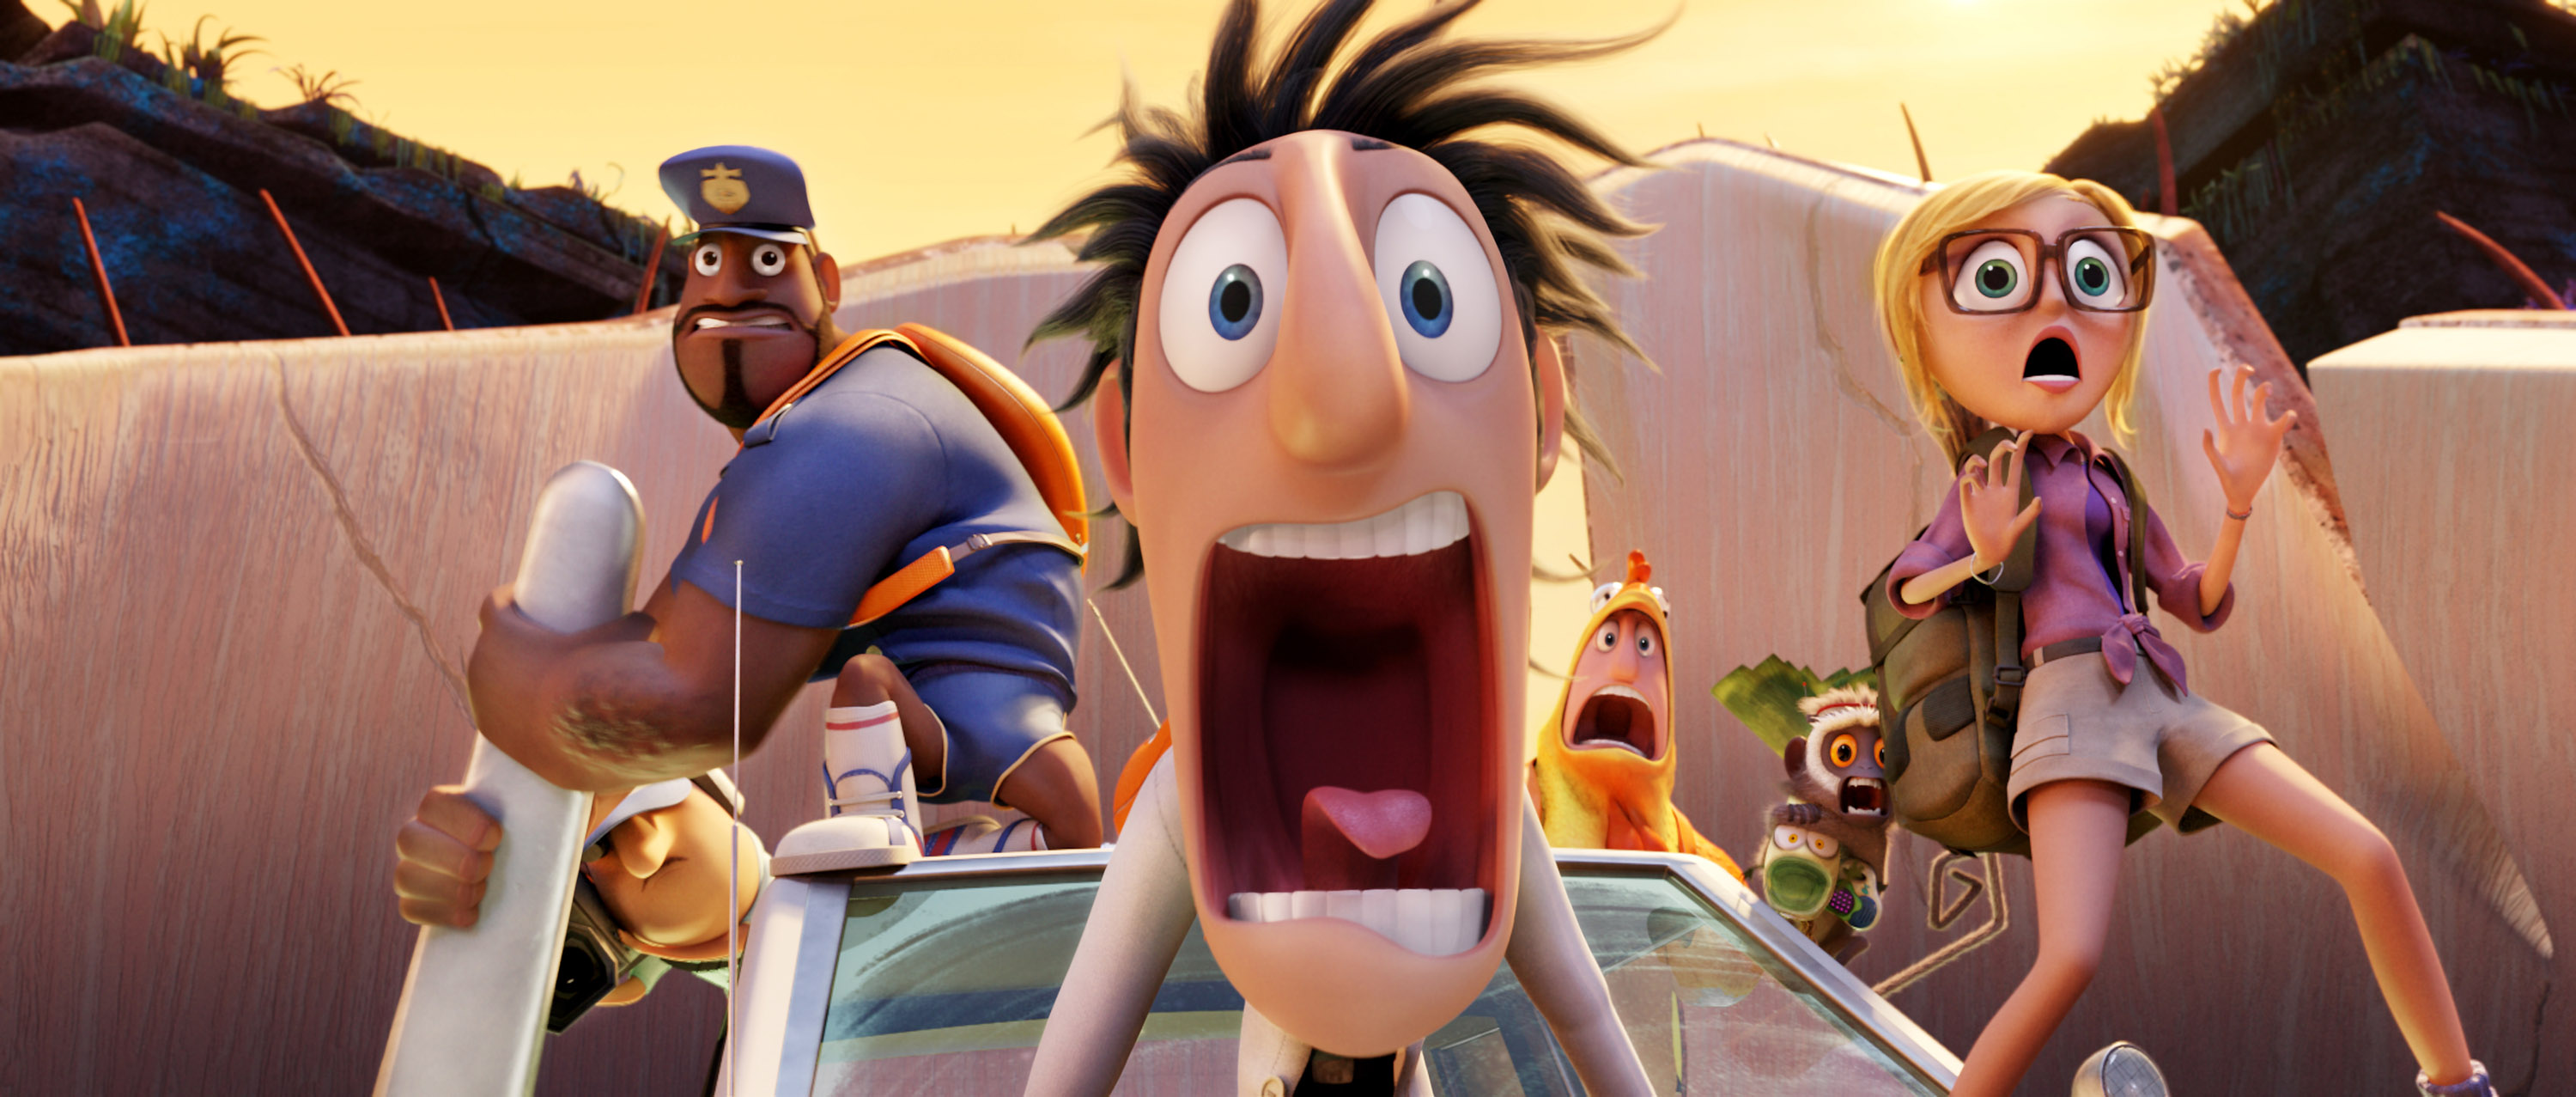 Earl, voiced by Terry Crews, Flint, voiced by Bill Hader, and Sam, voiced by Anna Faris in a scene from 'Cloudy with a Chance of Meatballs.'